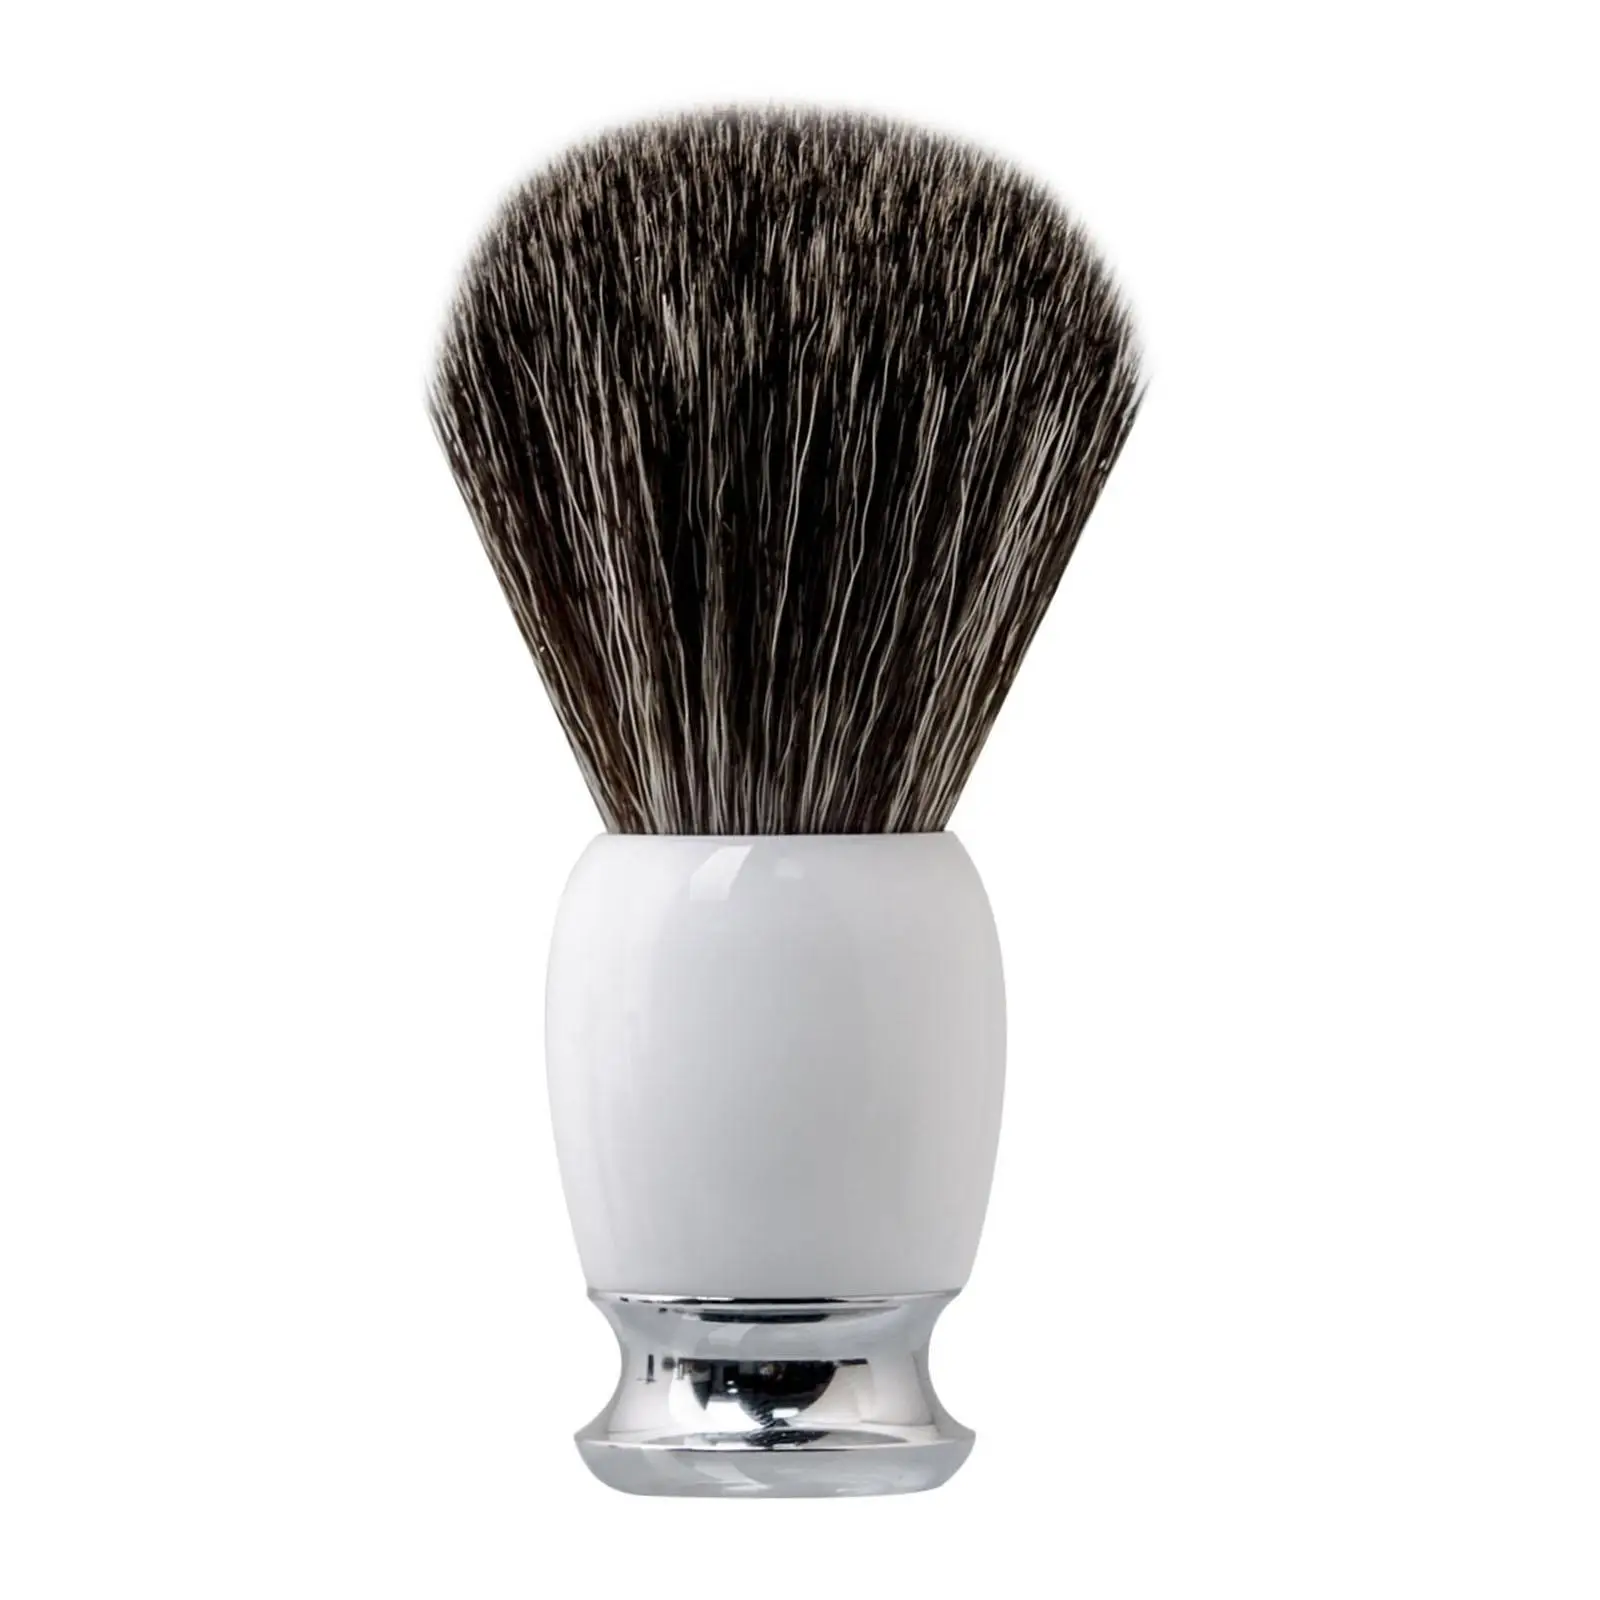 Hair Shaving Brush Beard Brush Hand Crafted for Men Dad Boyfriend Husband Rich Lather Classic Face Cleaning Barber Shave Brush